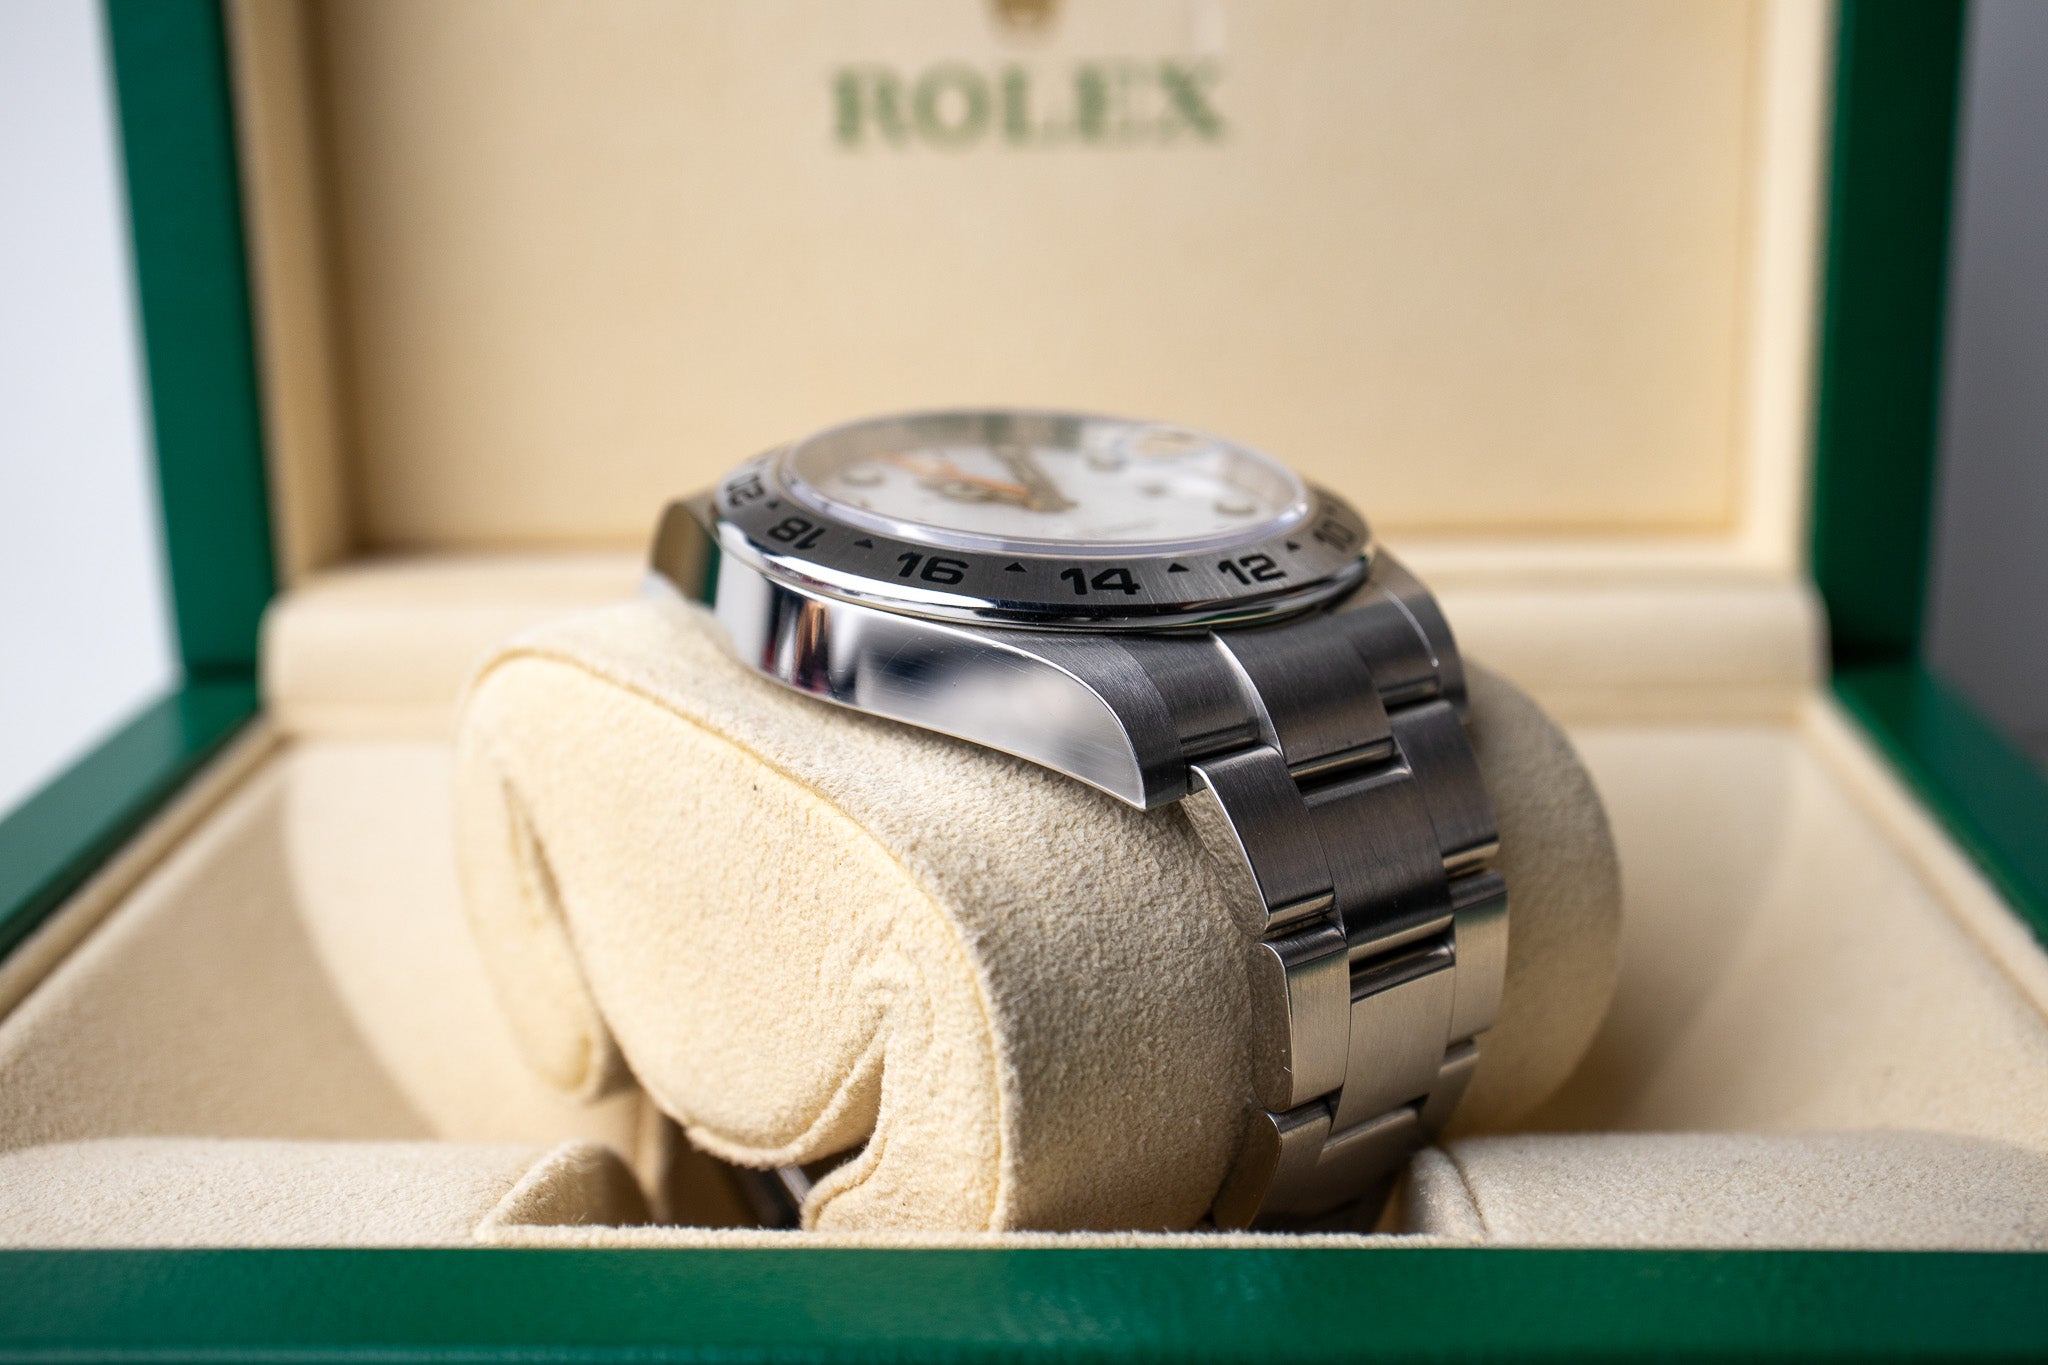 Rolex Explorer II reference 16570 bottom left side of the case and lug 